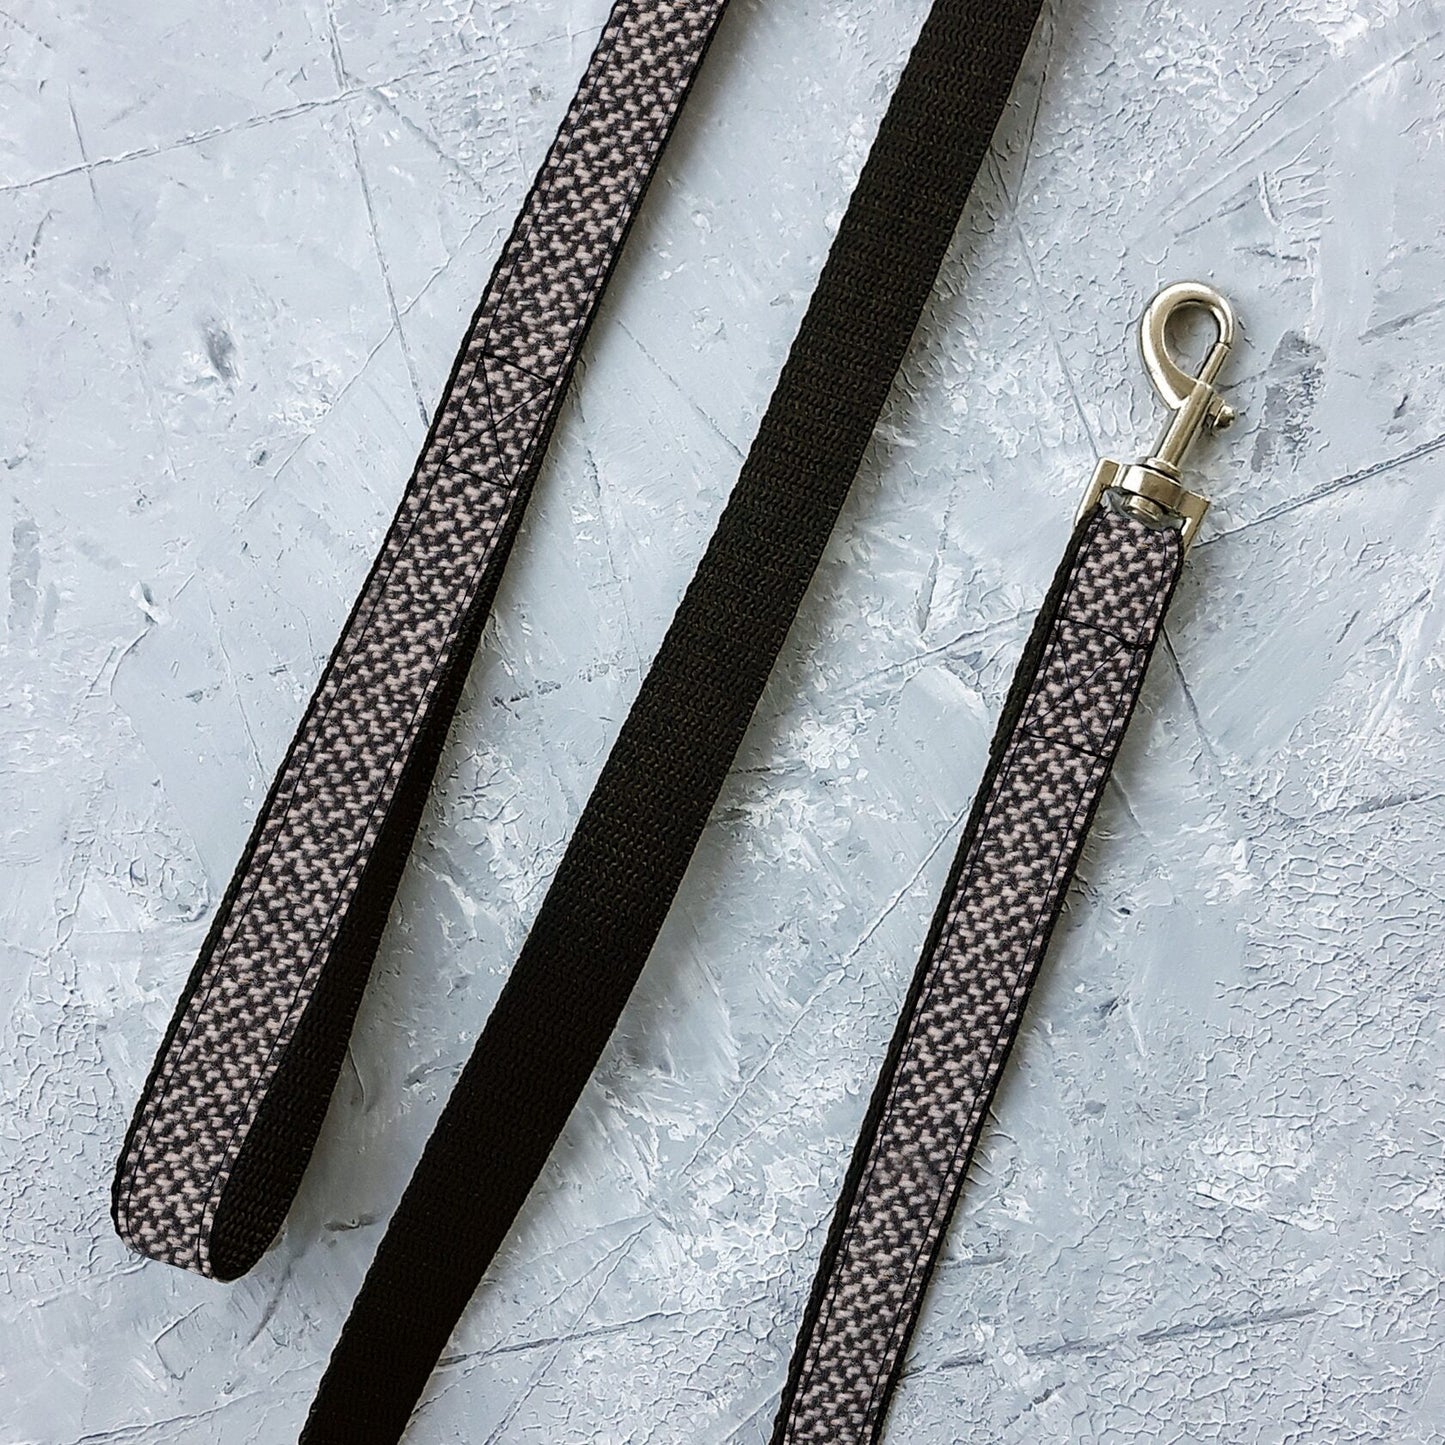 Tweed leash for cat. Black and White. 8 feet